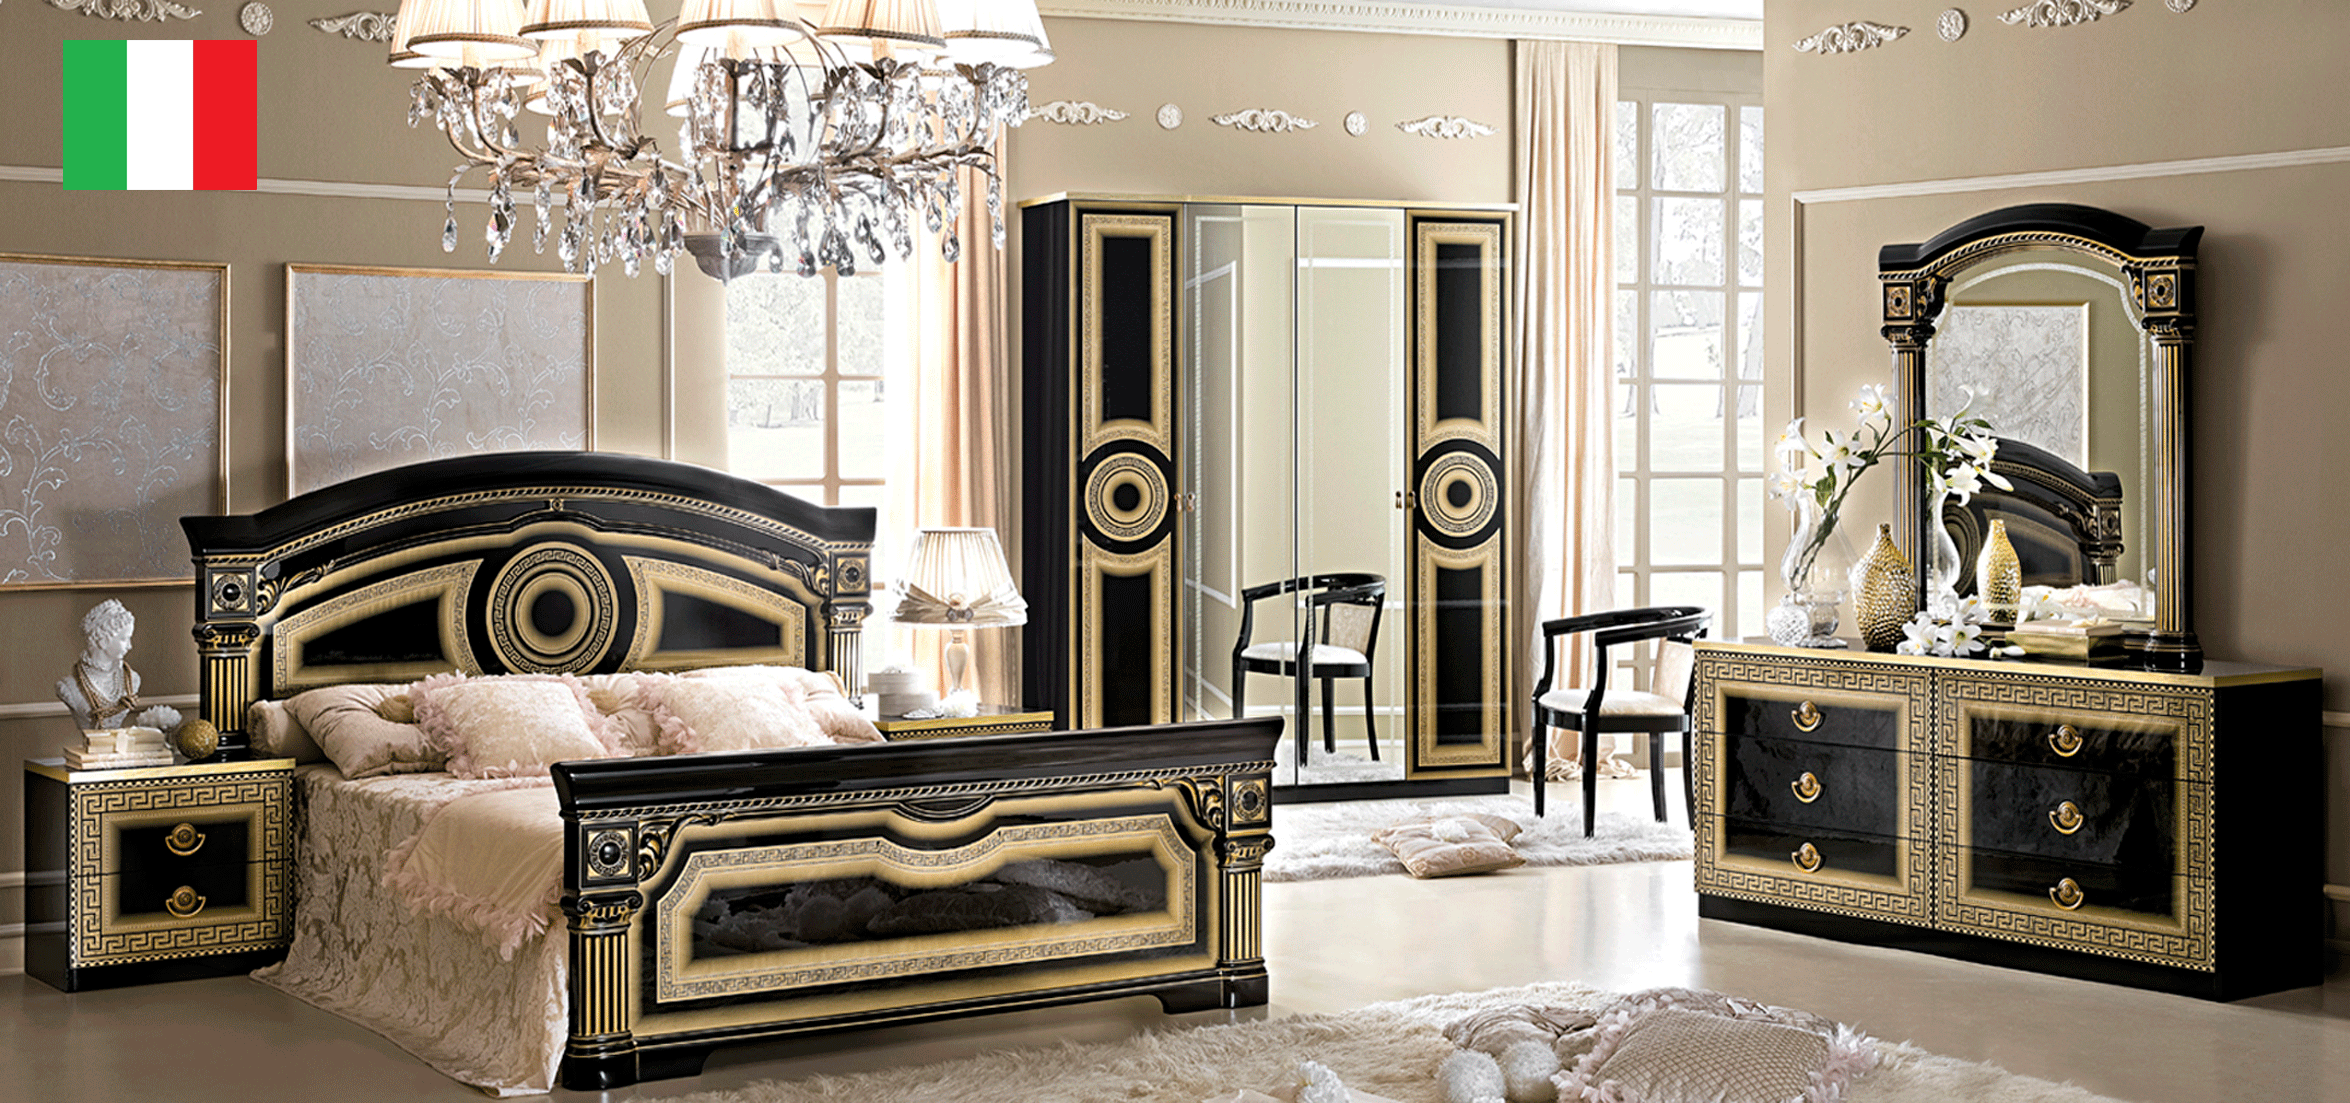 Clearance Bedroom Aida Bedroom Black w/Gold, Camelgroup Italy